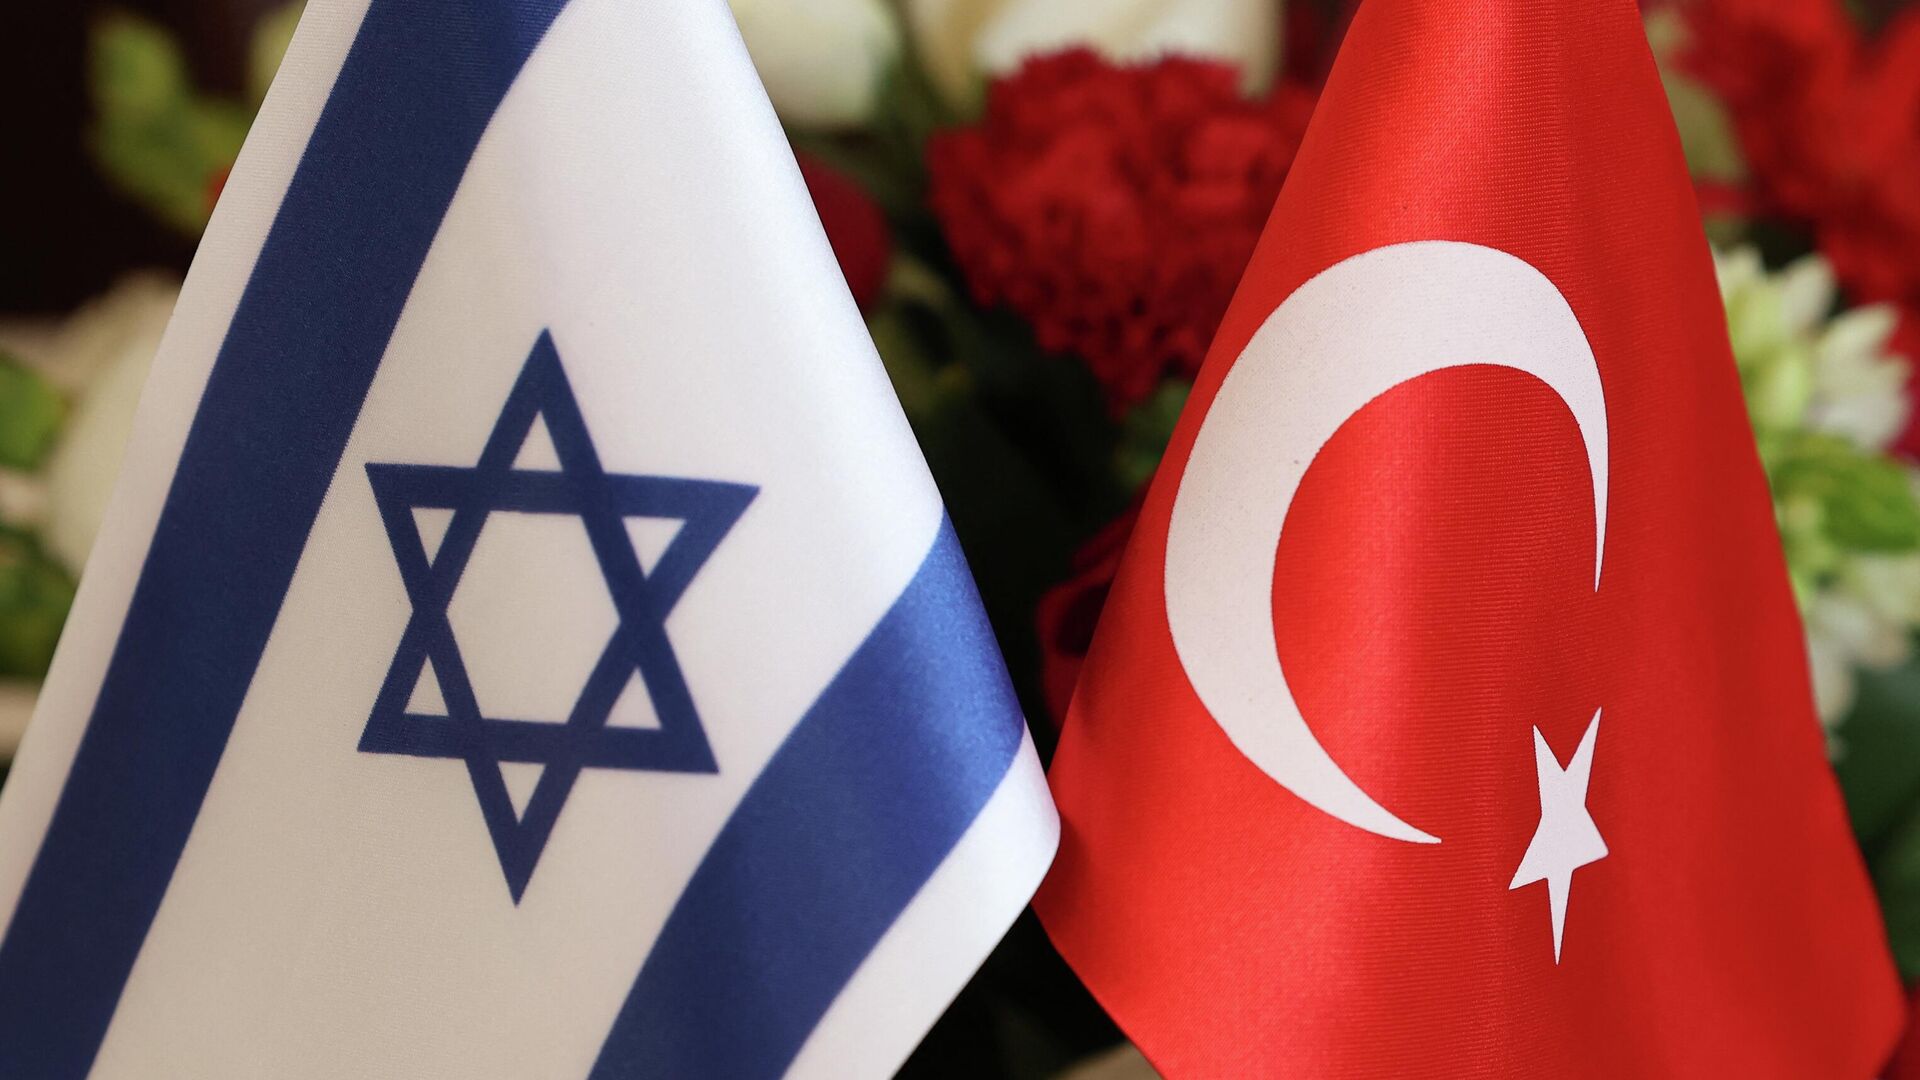 The Turkish (R) and Israeli flags are pictured before a meeting between the Turkish Foreign Minister Mevlut Cavusoglu and Israeli businessmen, in the coastral city of Tel Aviv, on May 25, 2022. - Cavusoglu is on a visit to Israel and the occupied-West Bank to meet with Israeli and Palestinian officials. (Photo by JACK GUEZ / AFP) - اسپوتنیک افغانستان  , 1920, 12.11.2022